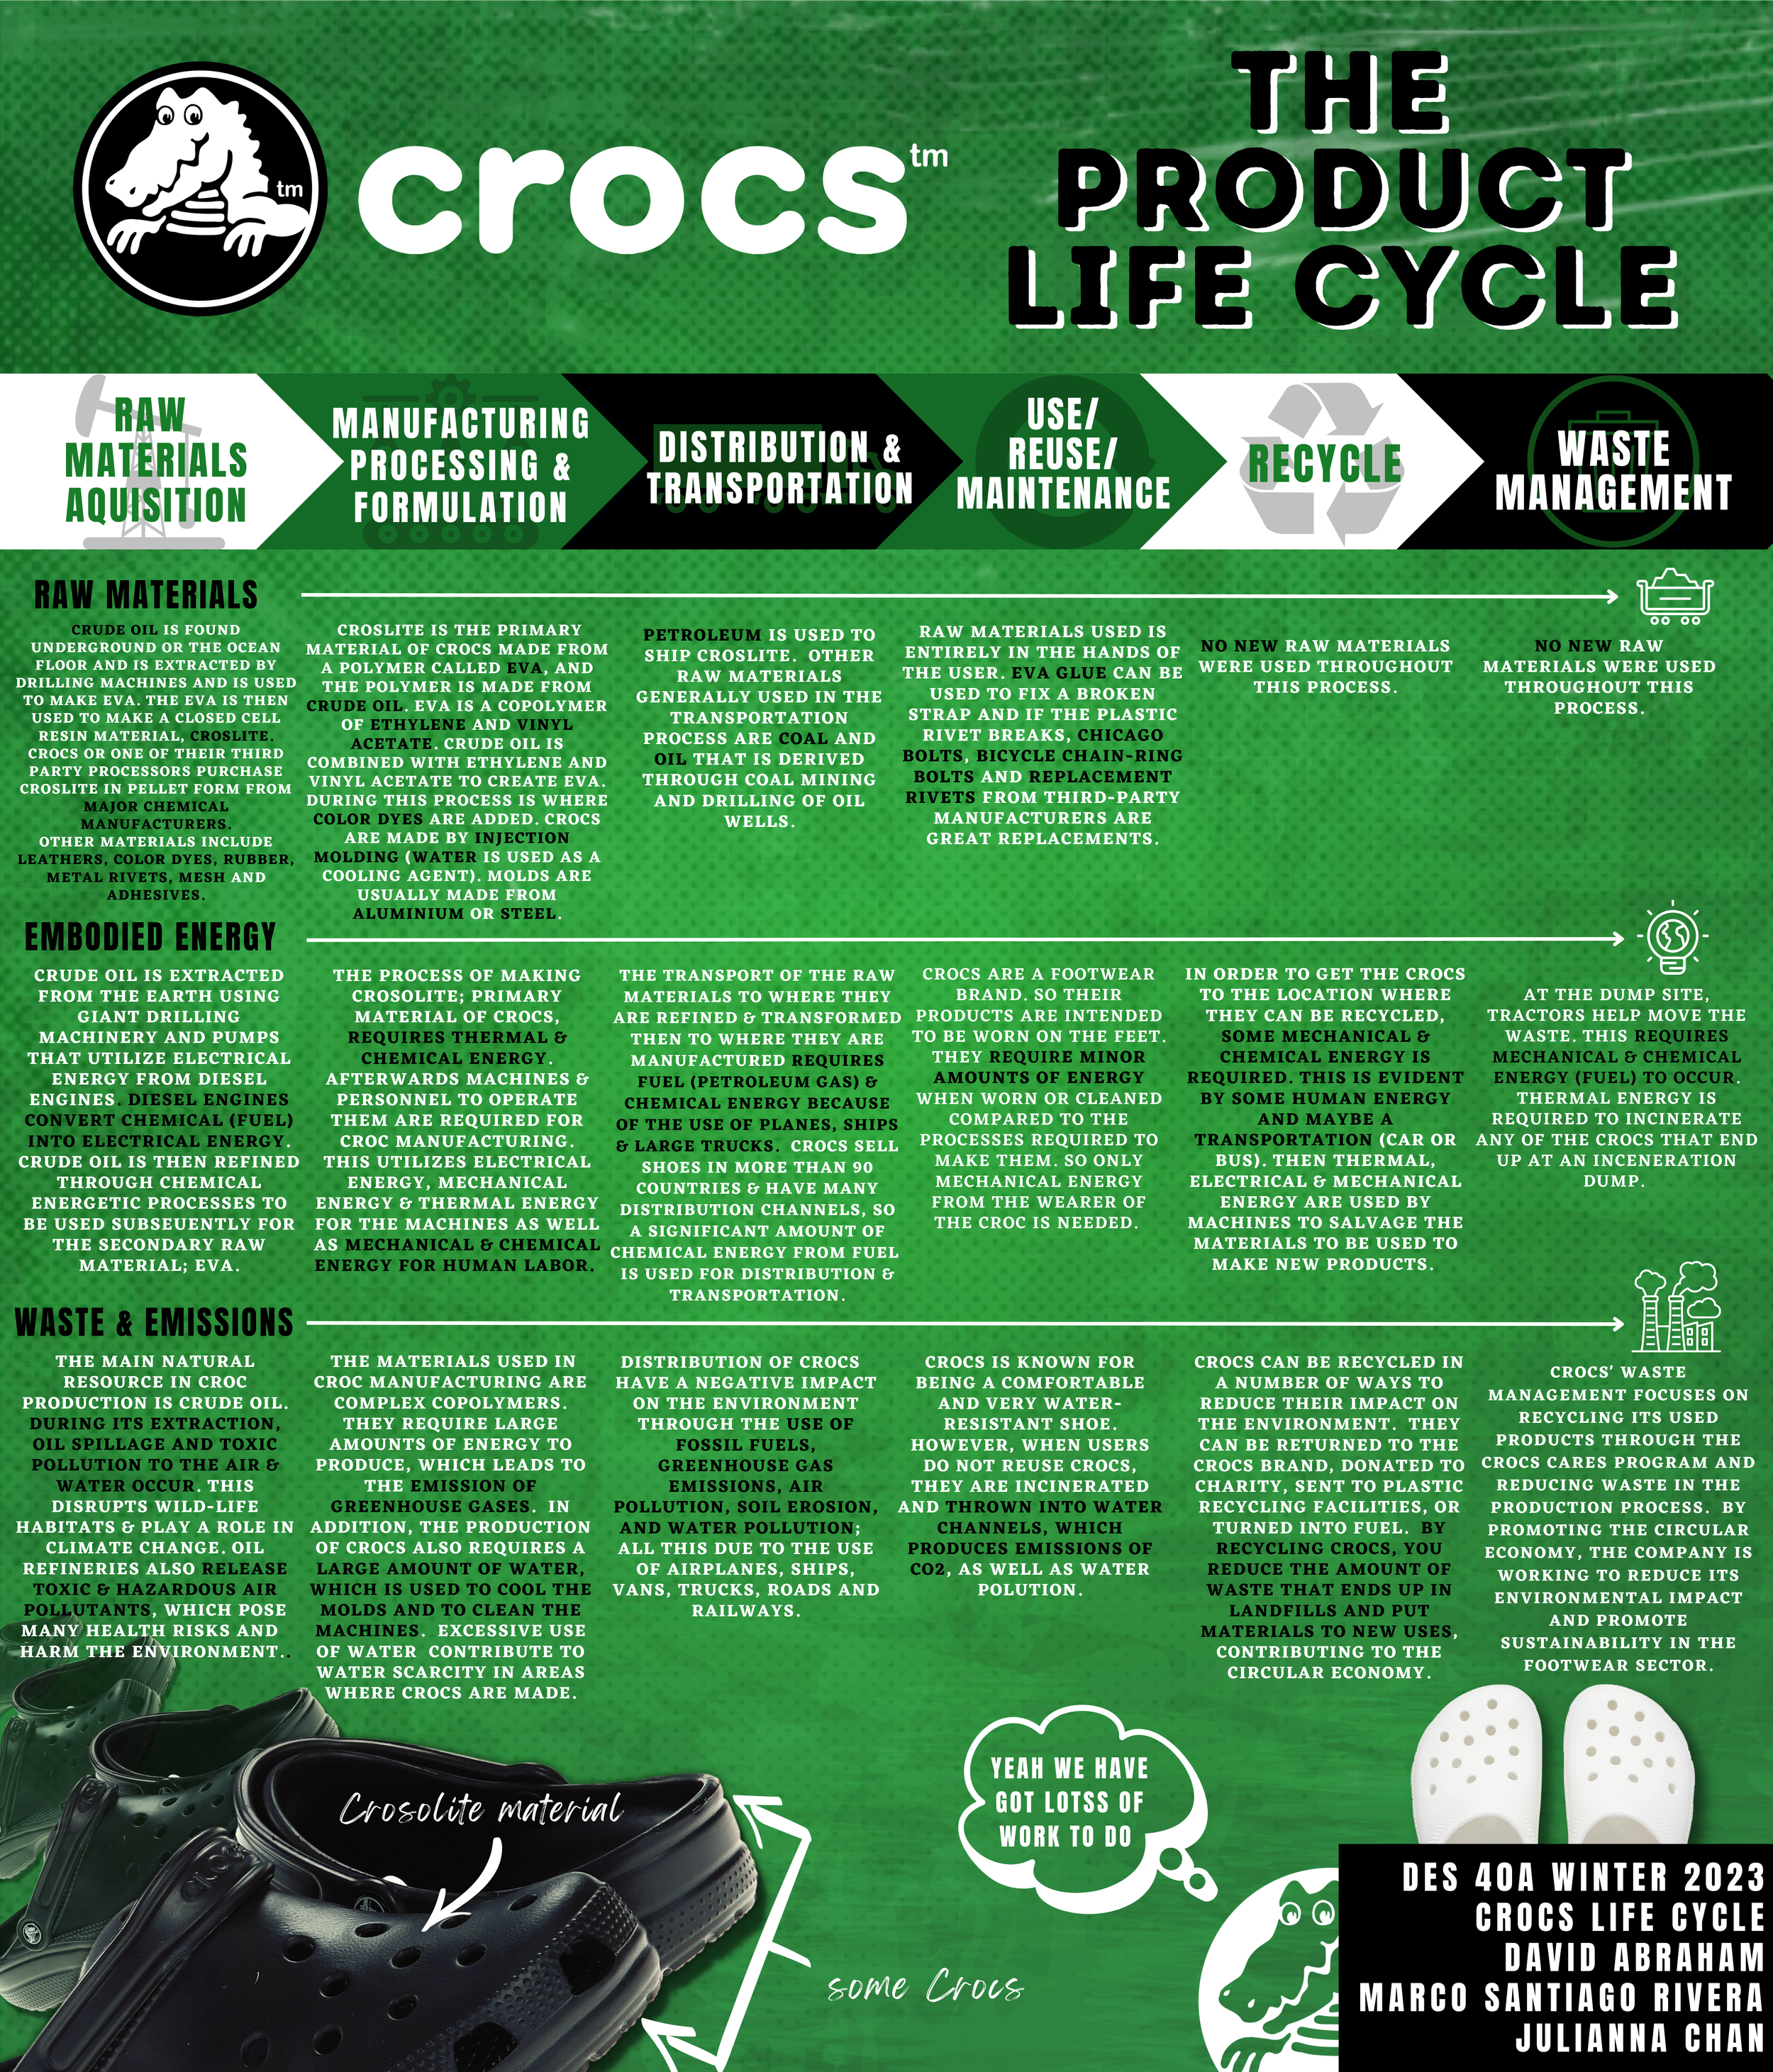 Crocs Other Items for Women